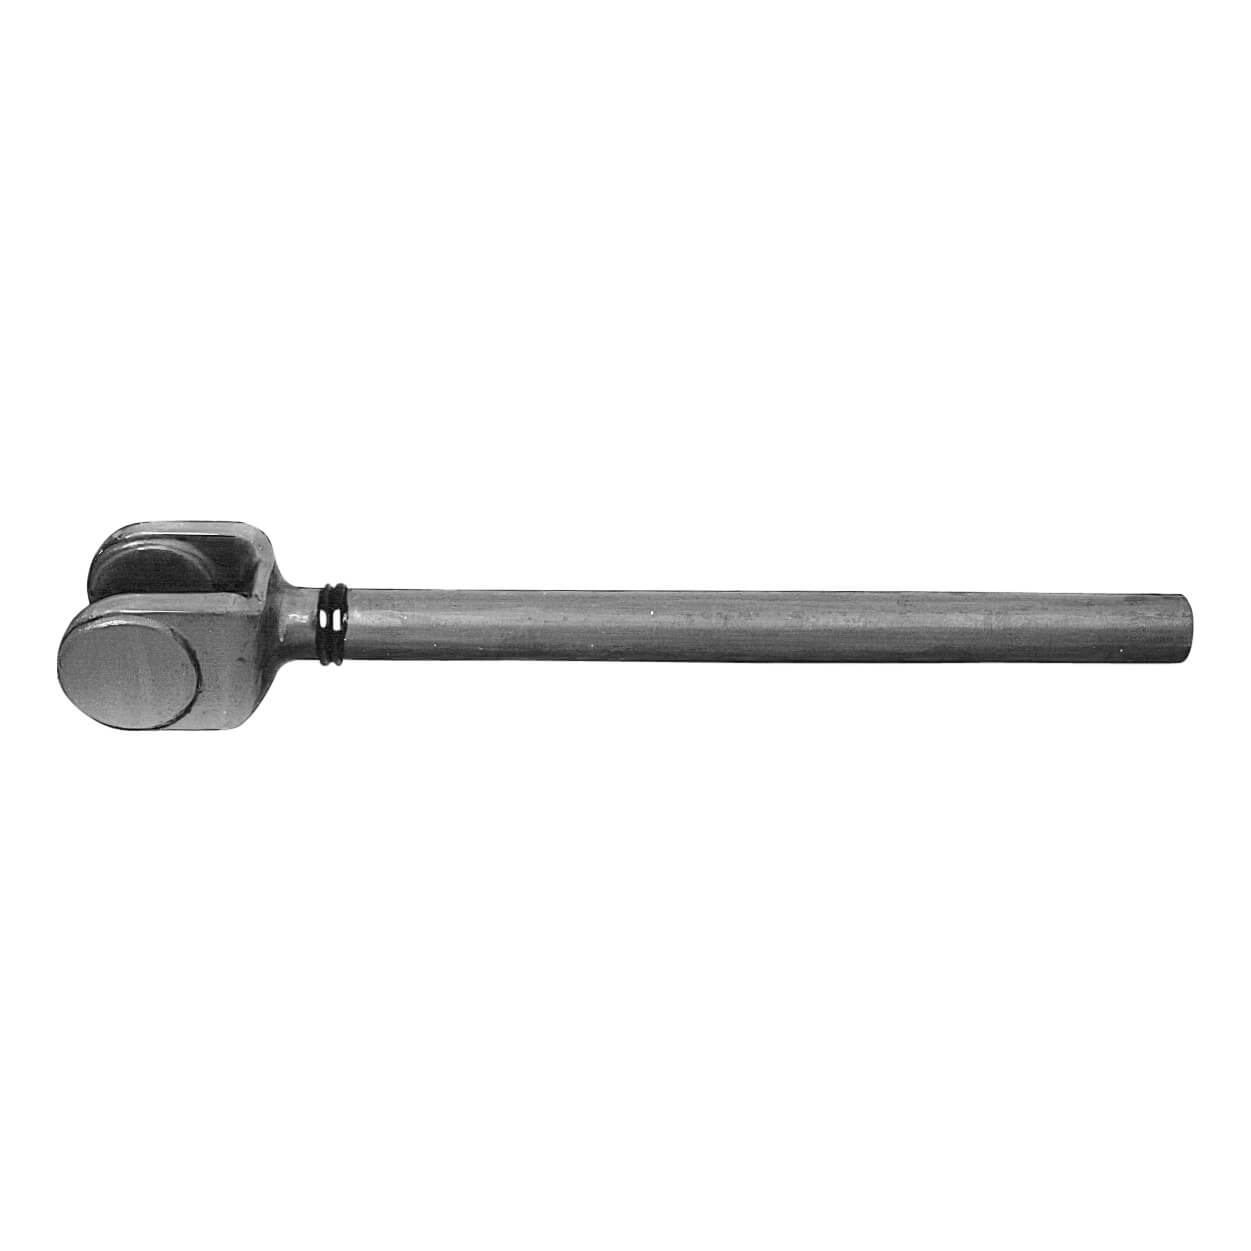 Bar stock welded to clevis forging for manufacture of large (5 inches (127 mm) diameter and larger) piston rods